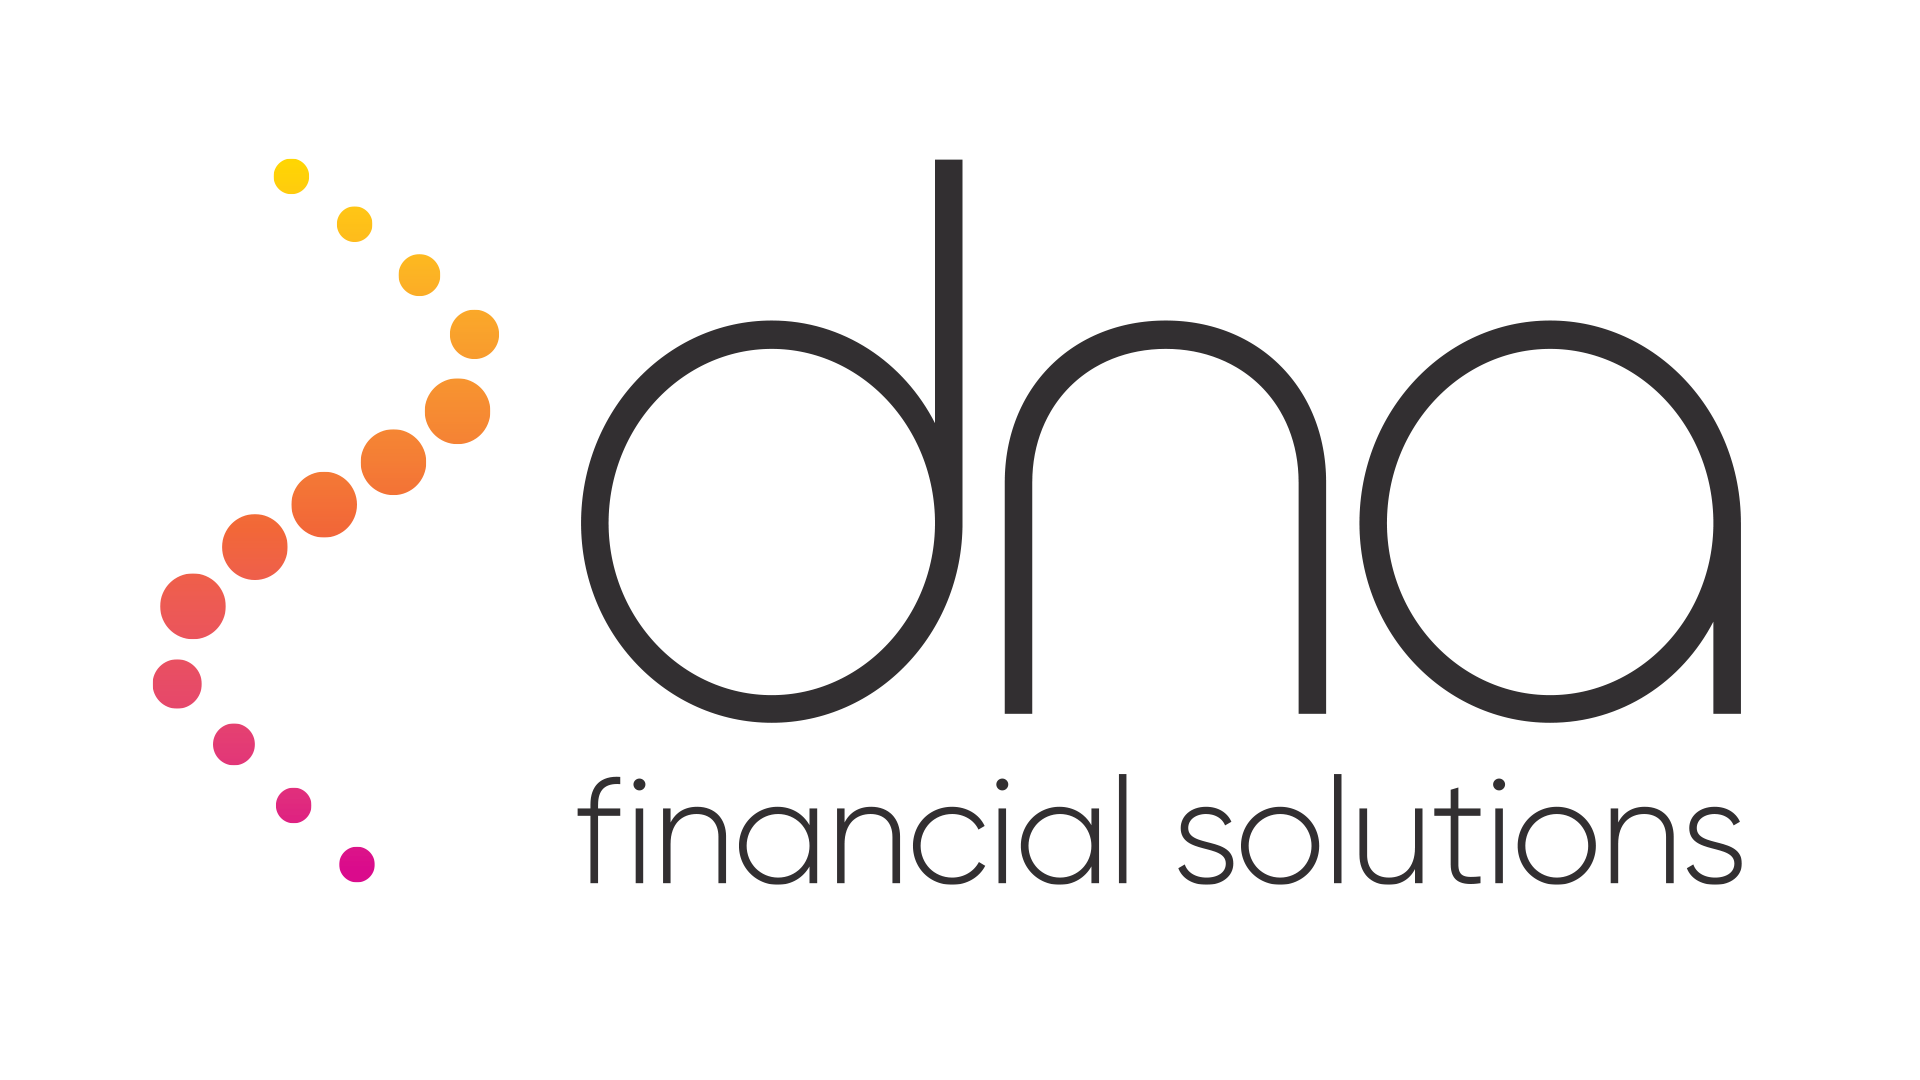 DNA Financial Solutions